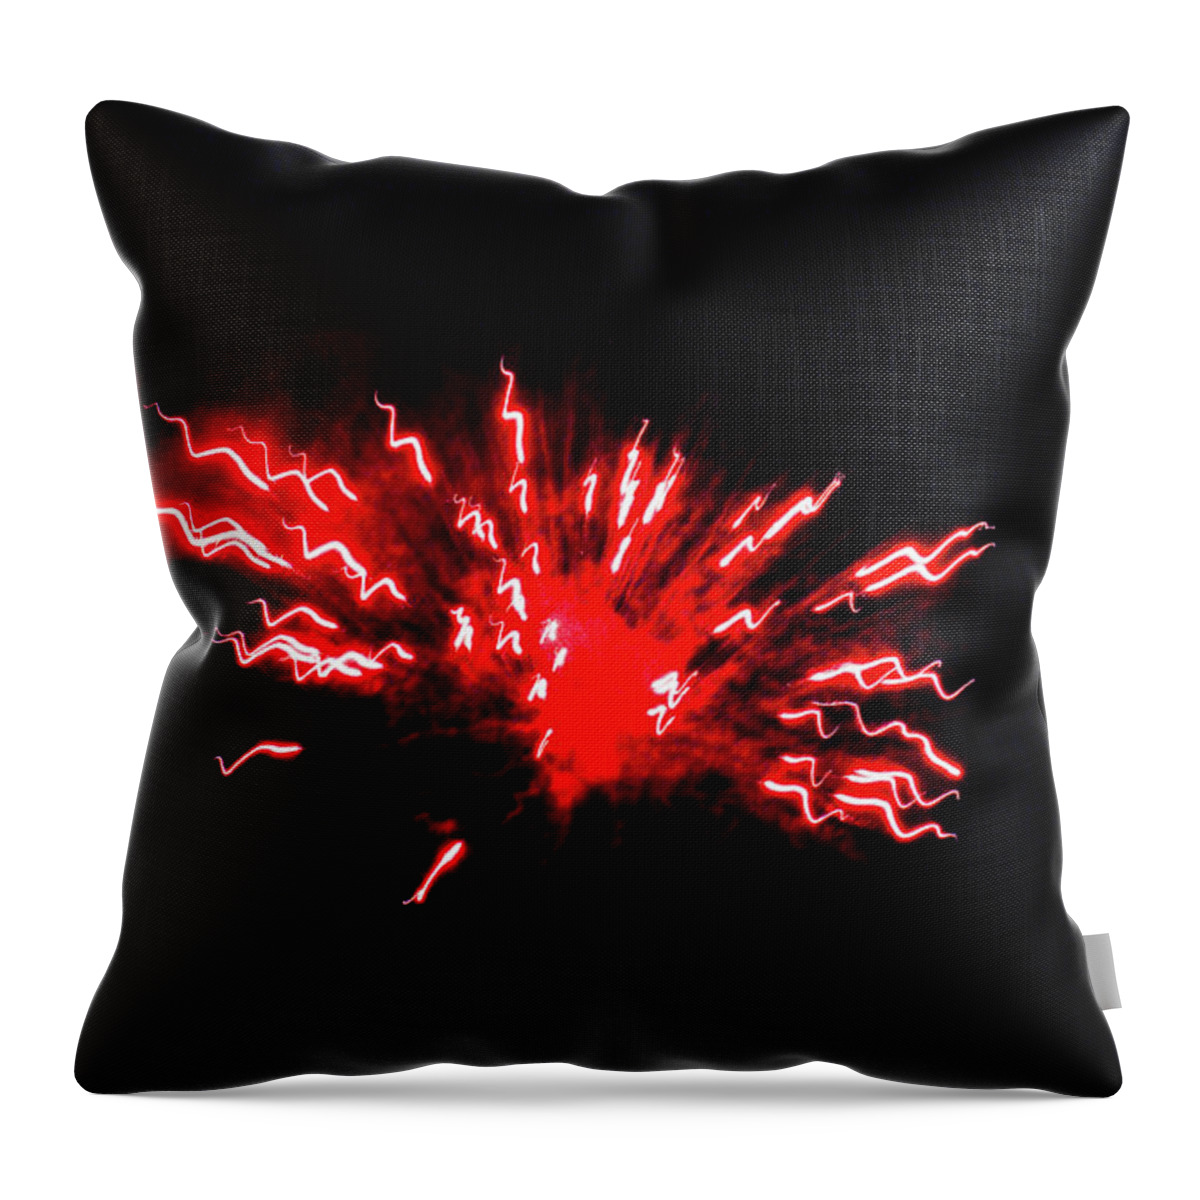 Fireworks Throw Pillow featuring the photograph Red Shocker Firework Explosion by Ed Williams